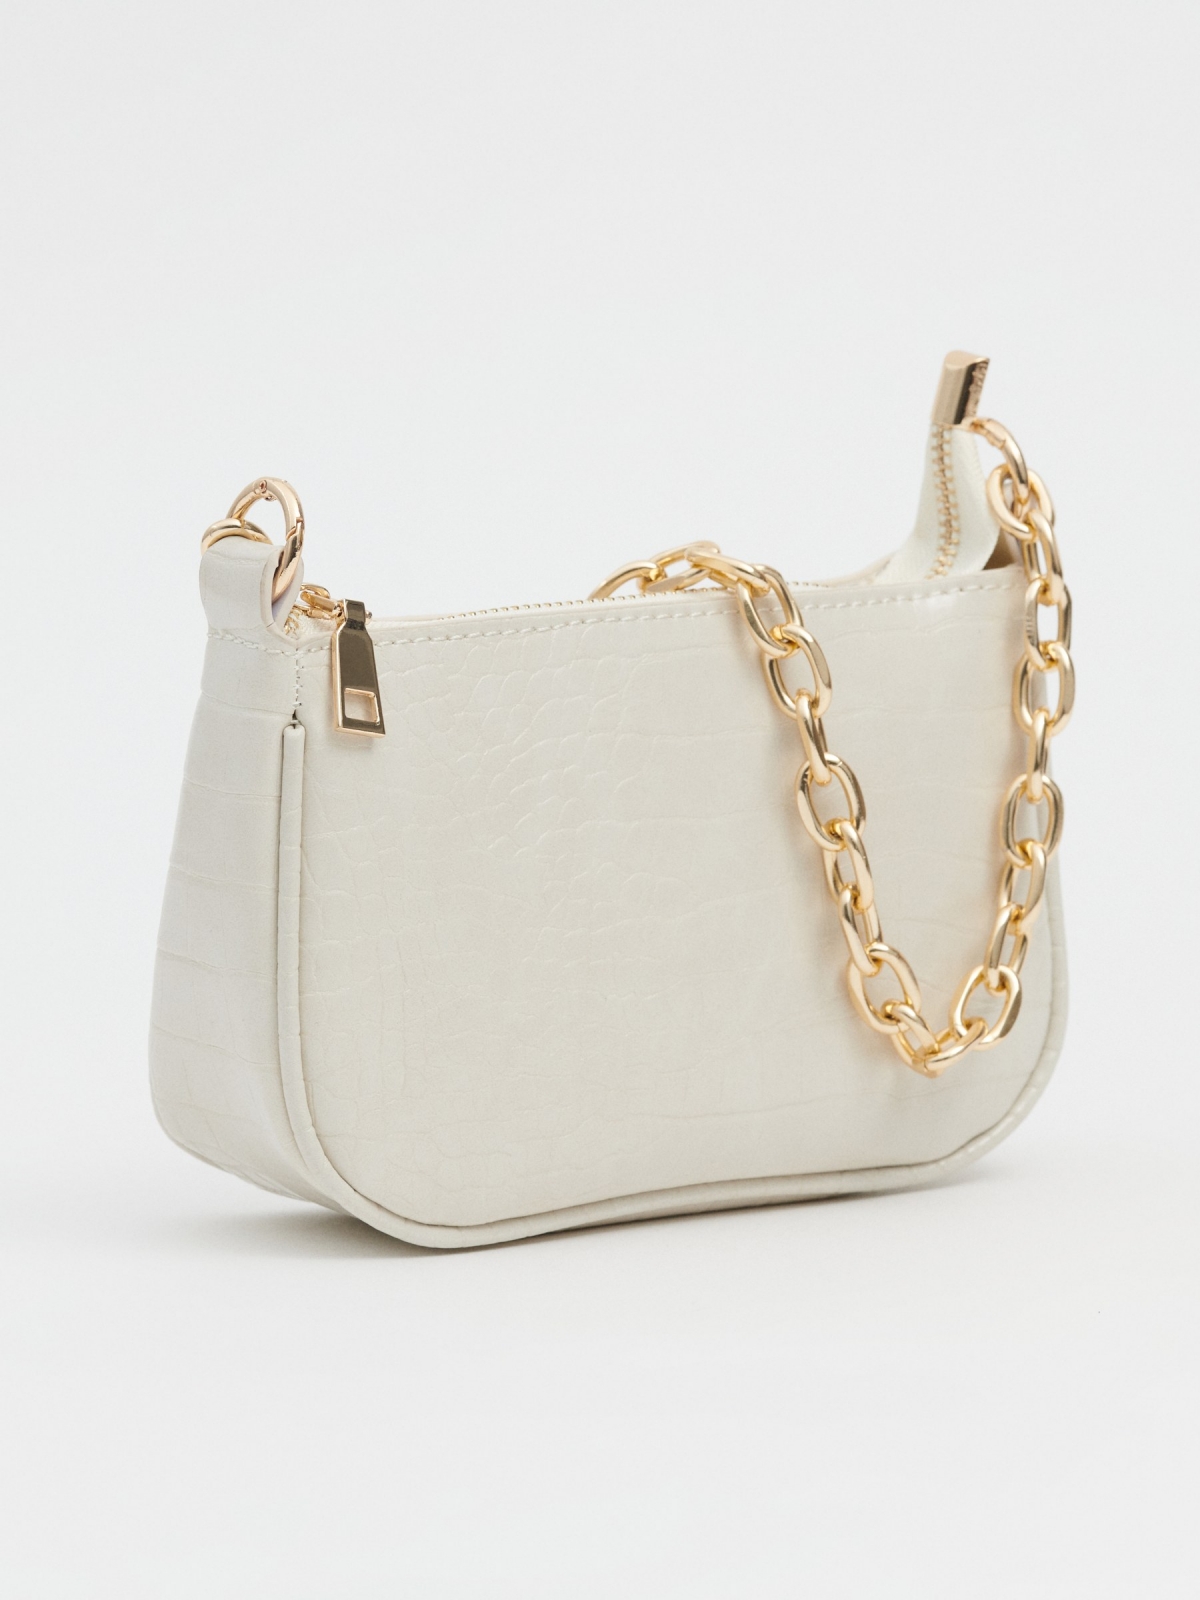 Chain effect leather bag off white back view